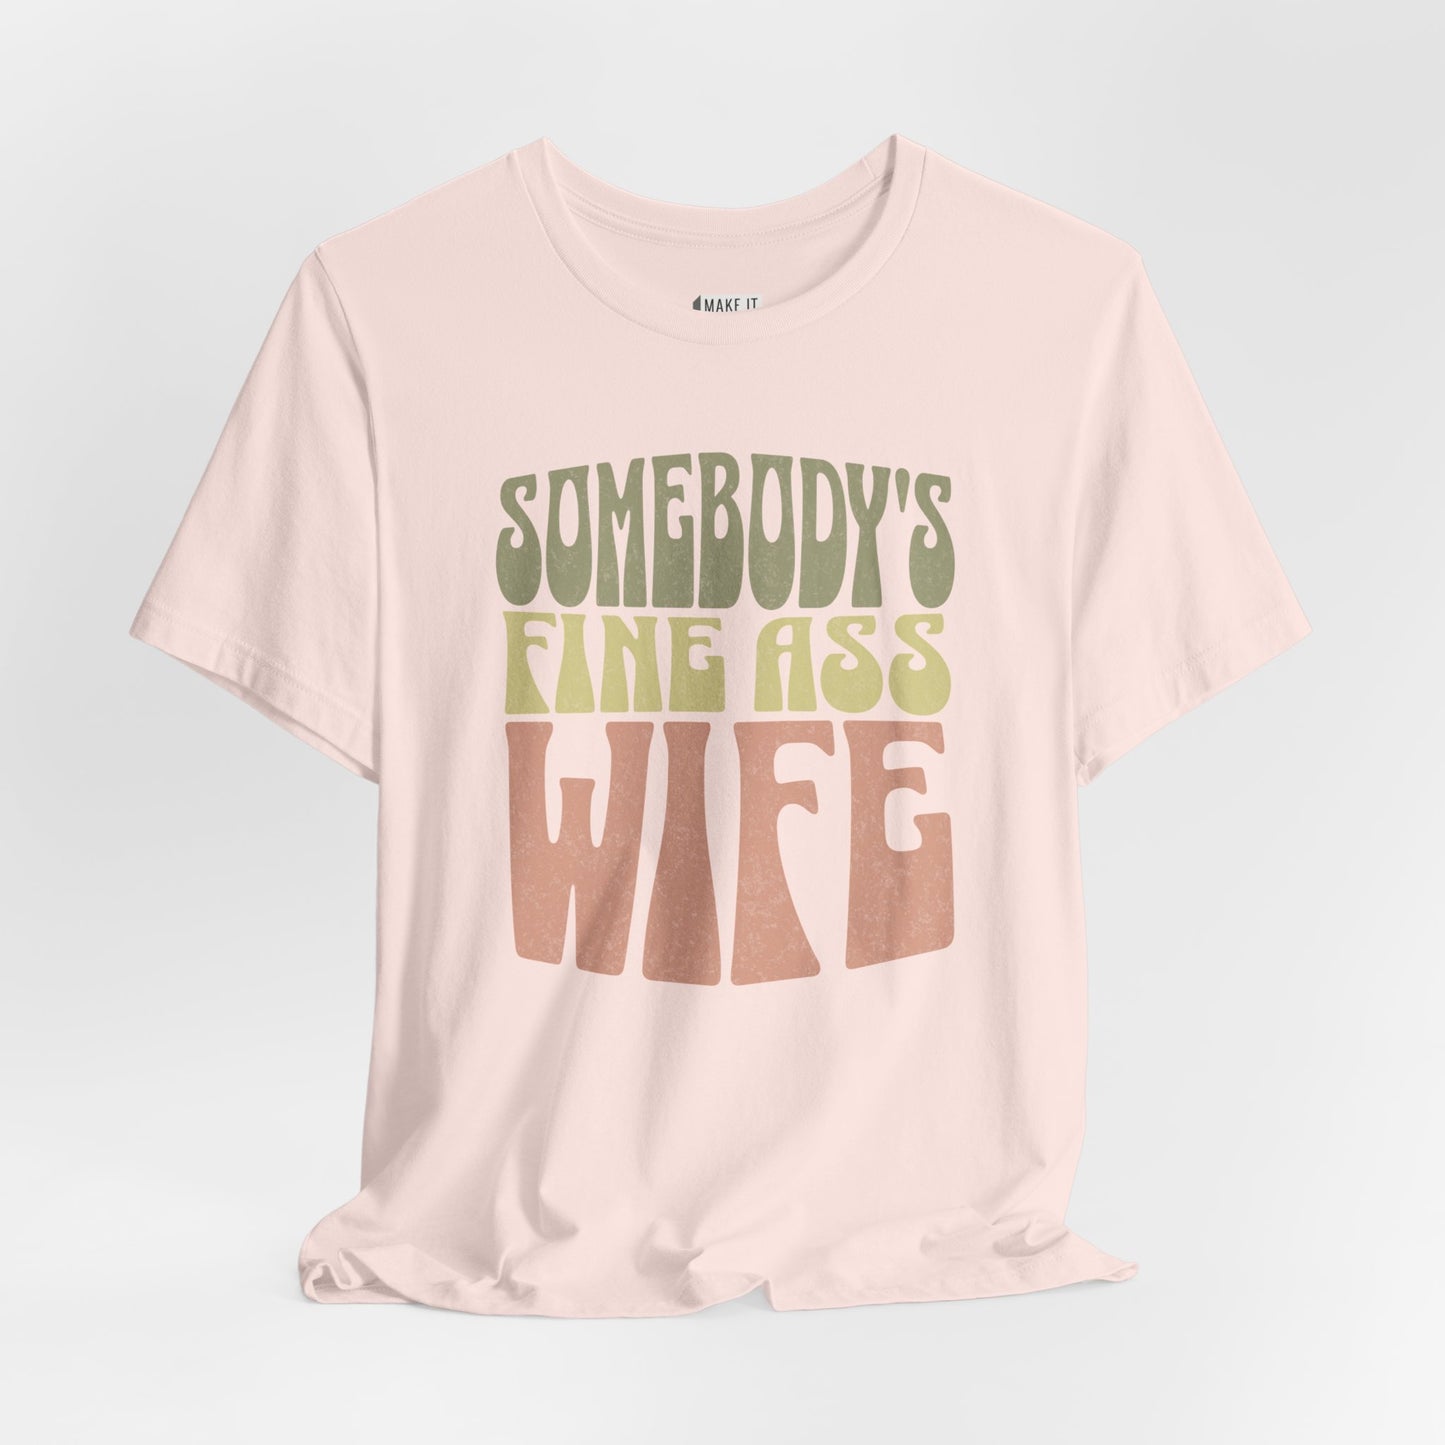 "Somebody's Fine Ass Wife" Tee